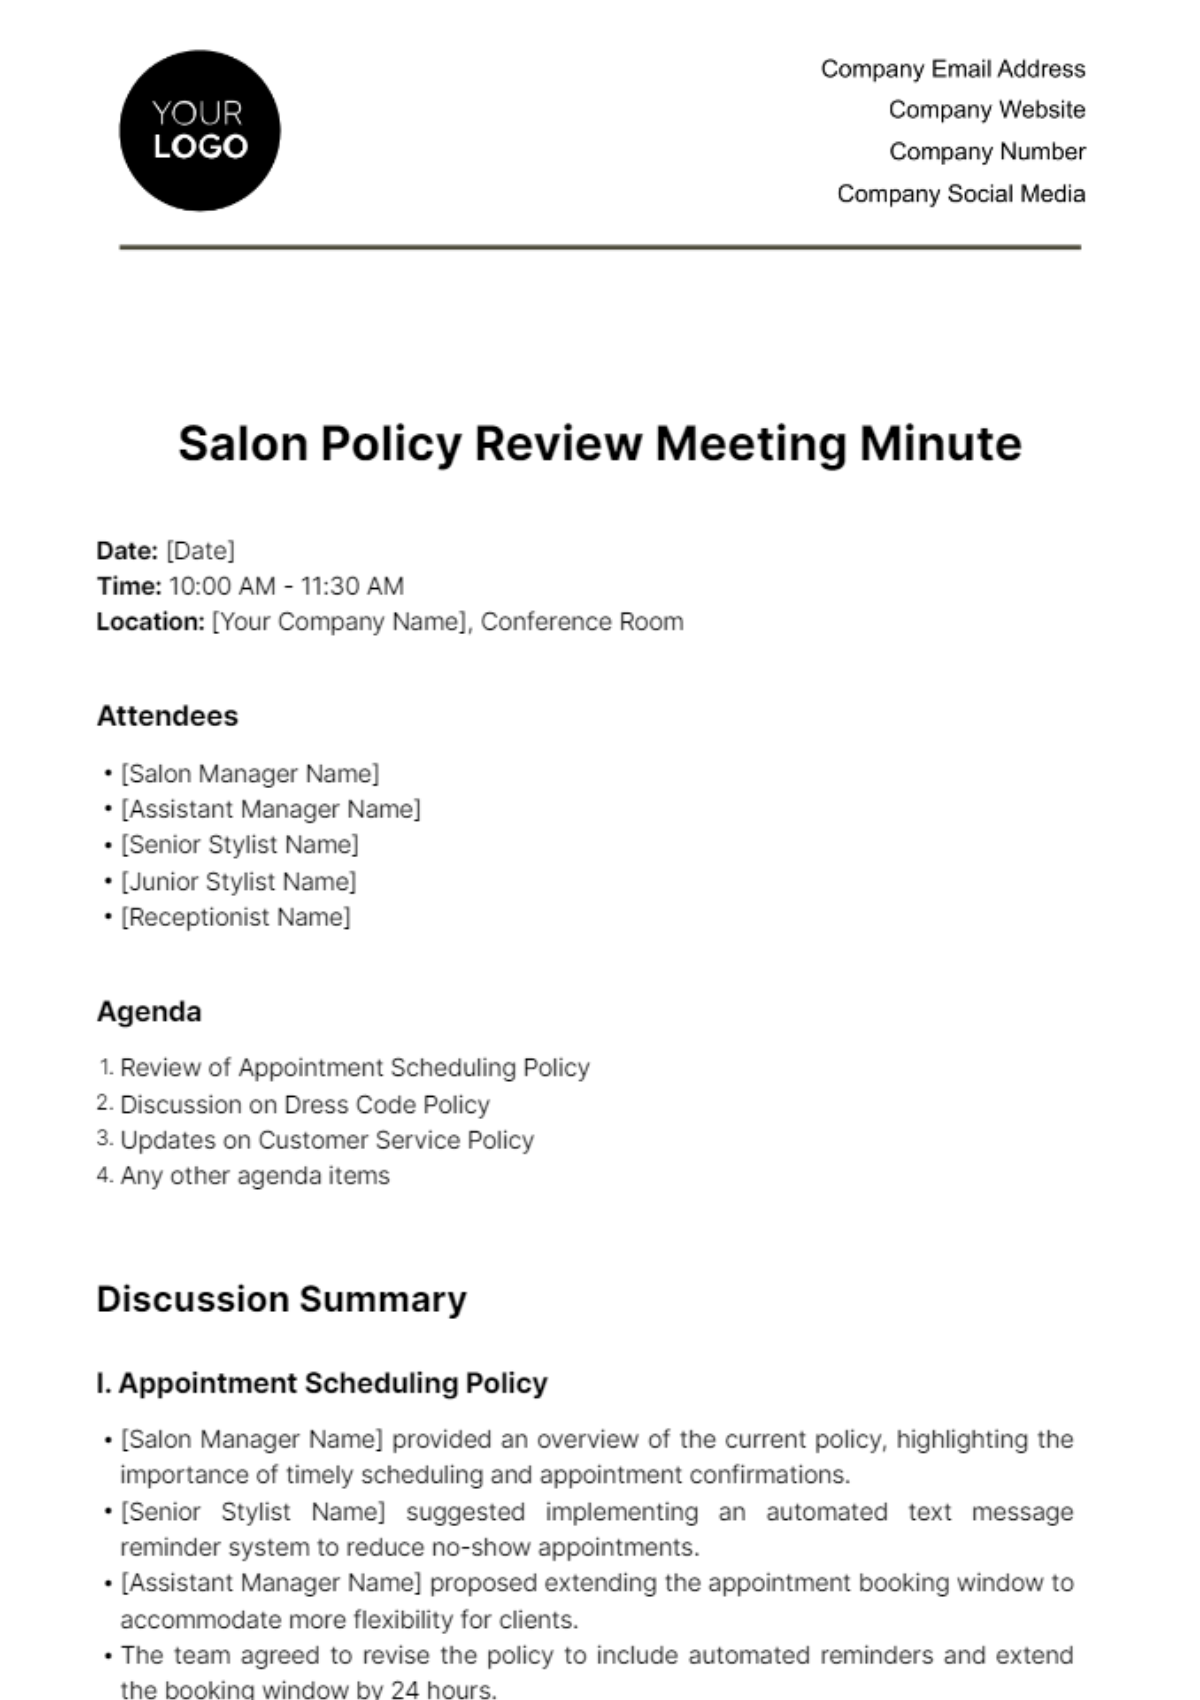 Salon Policy Review Meeting Minute Template